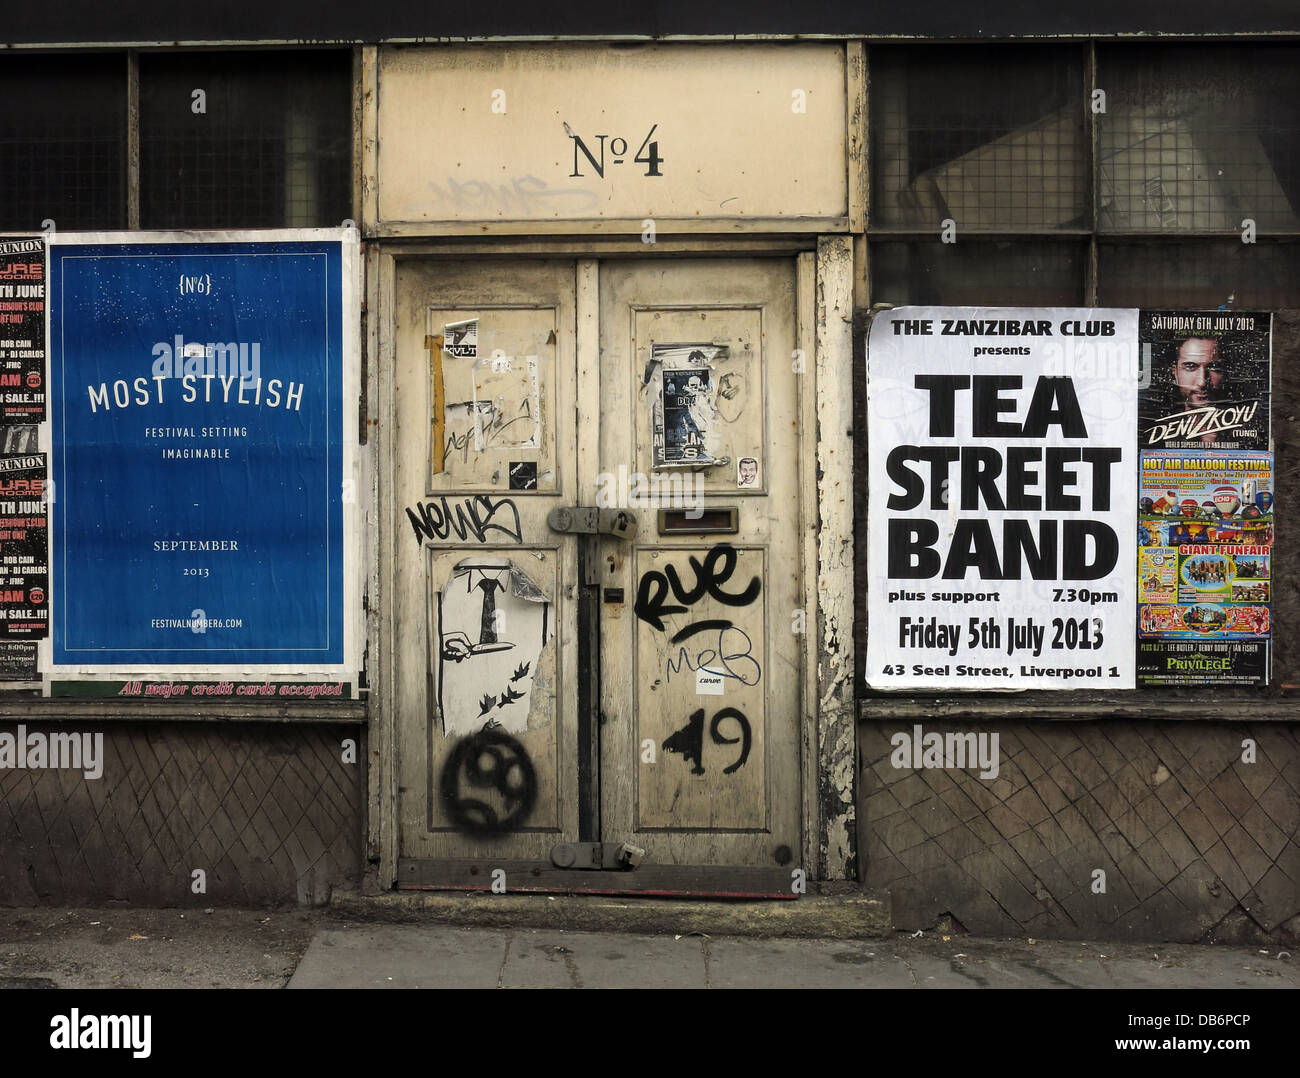 No4, old doorway,abandoned building with posters, Liverpool, Merseyside, North West England, UK Stock Photo